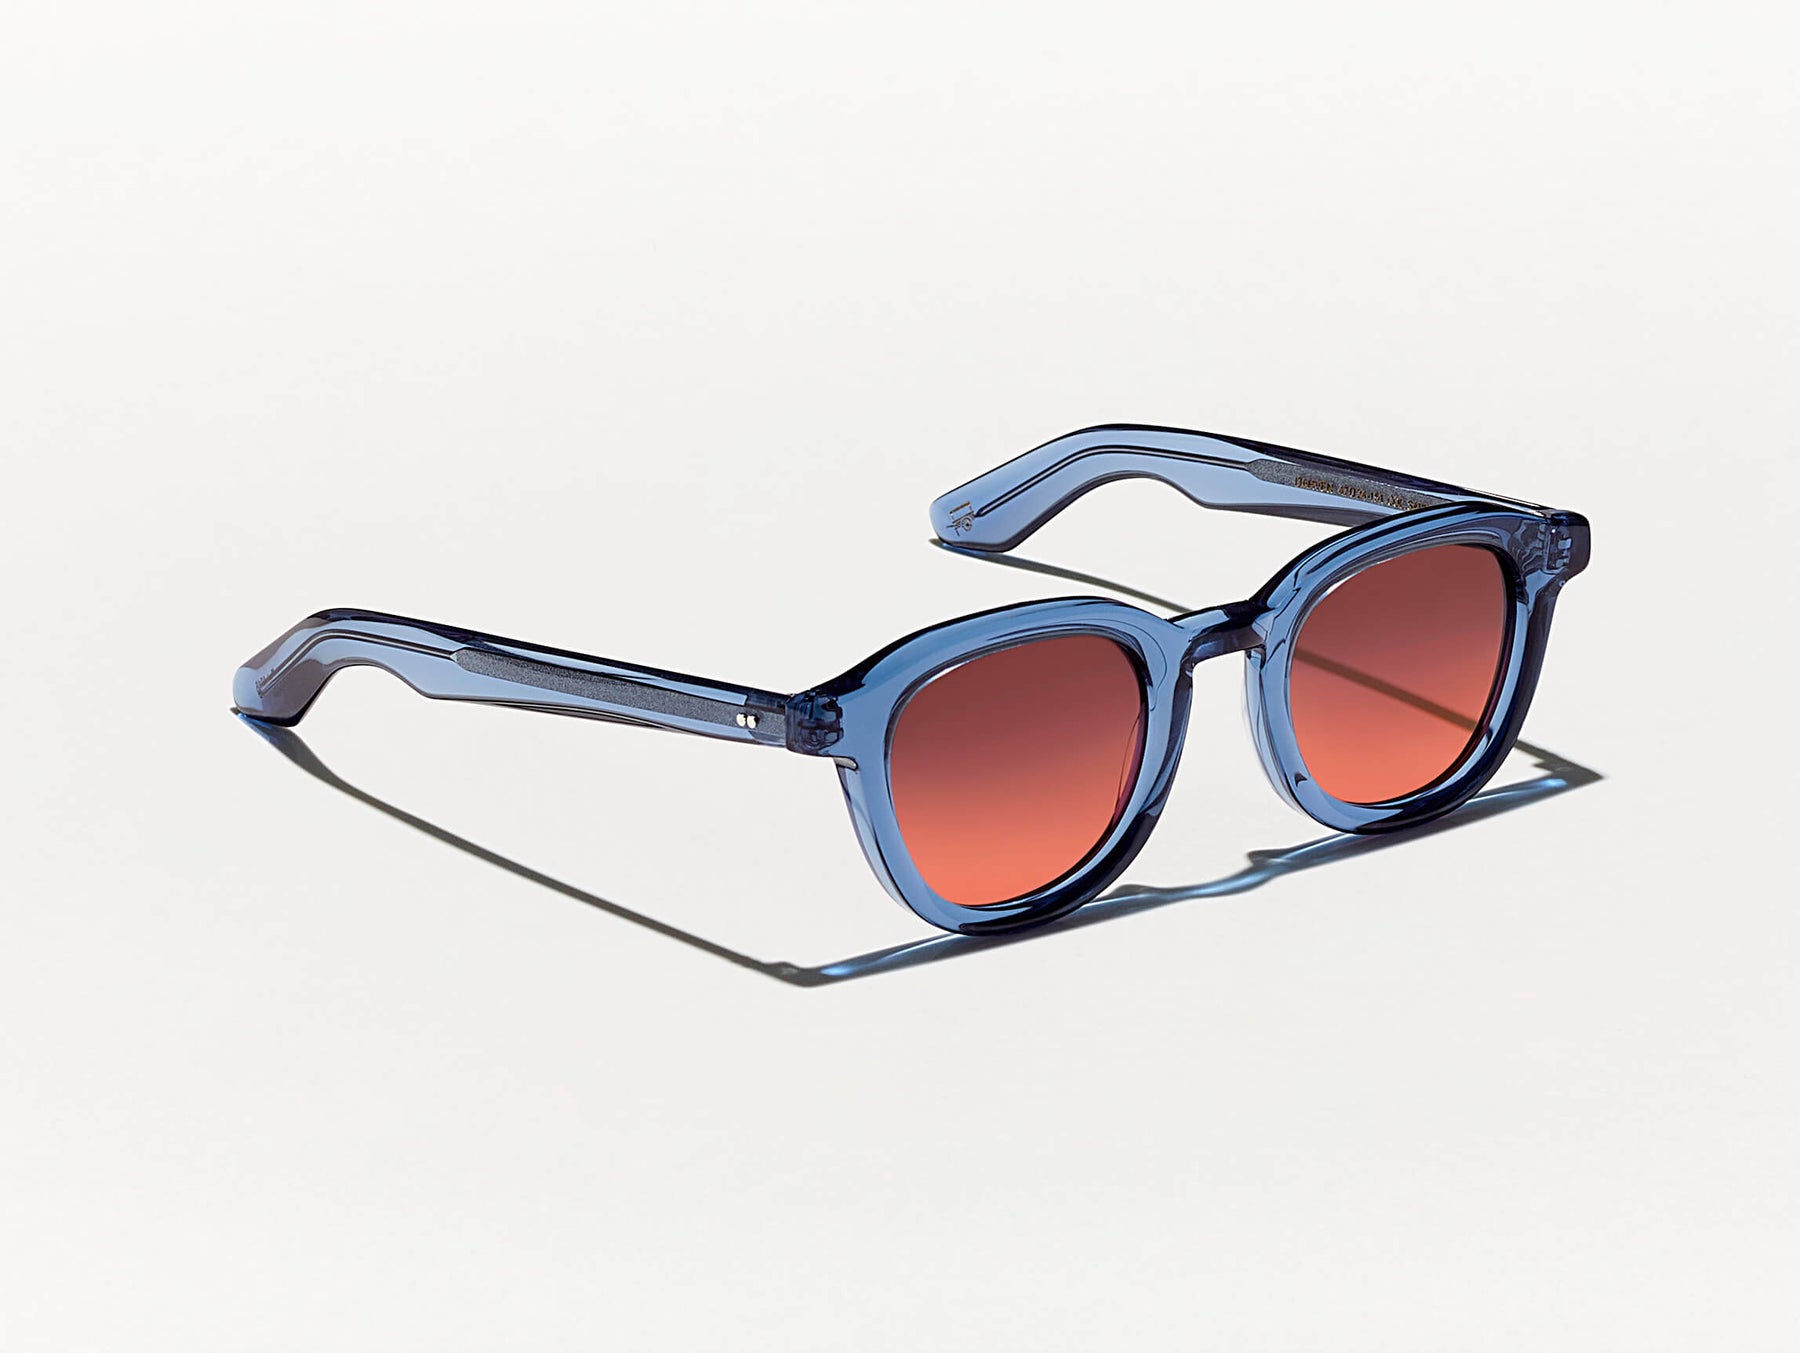 The DAHVEN in Sapphire with Cabernet Tinted Lenses